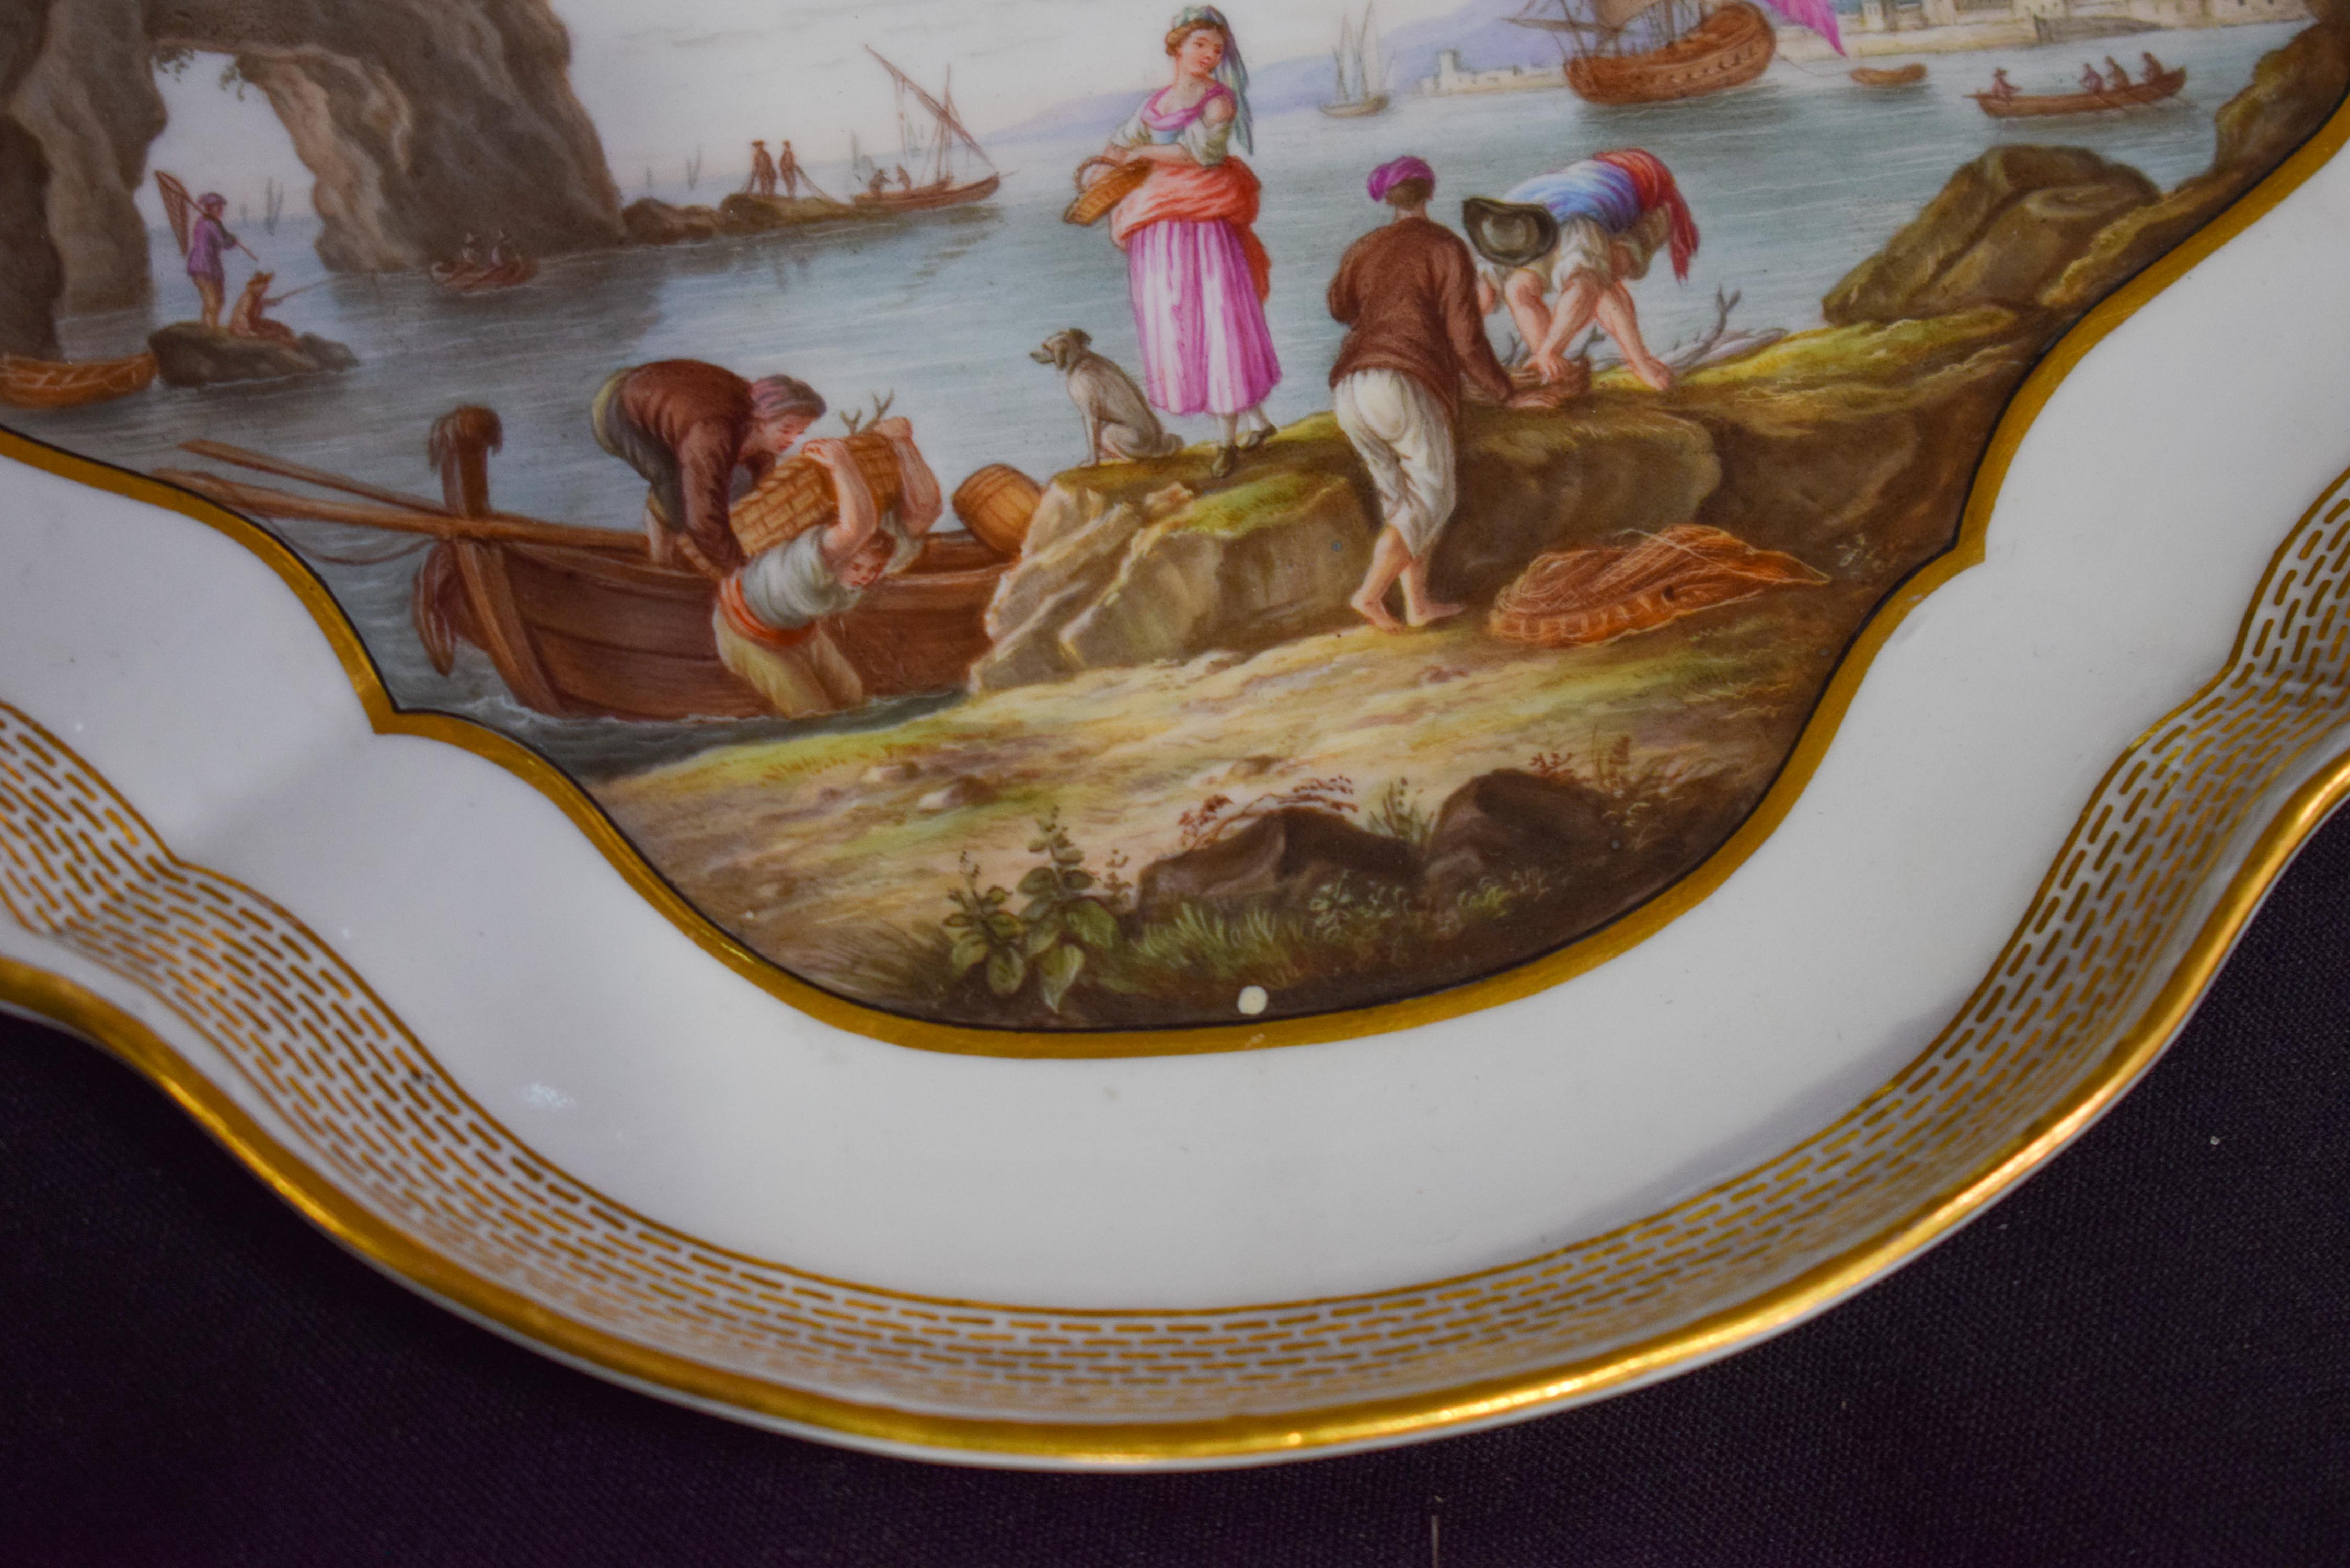 A FINE PAIR OF 18TH/19TH CENTURY MEISSEN TWIN HANDLED PORCELAIN DISHES painted with coastal views. 2 - Image 7 of 19